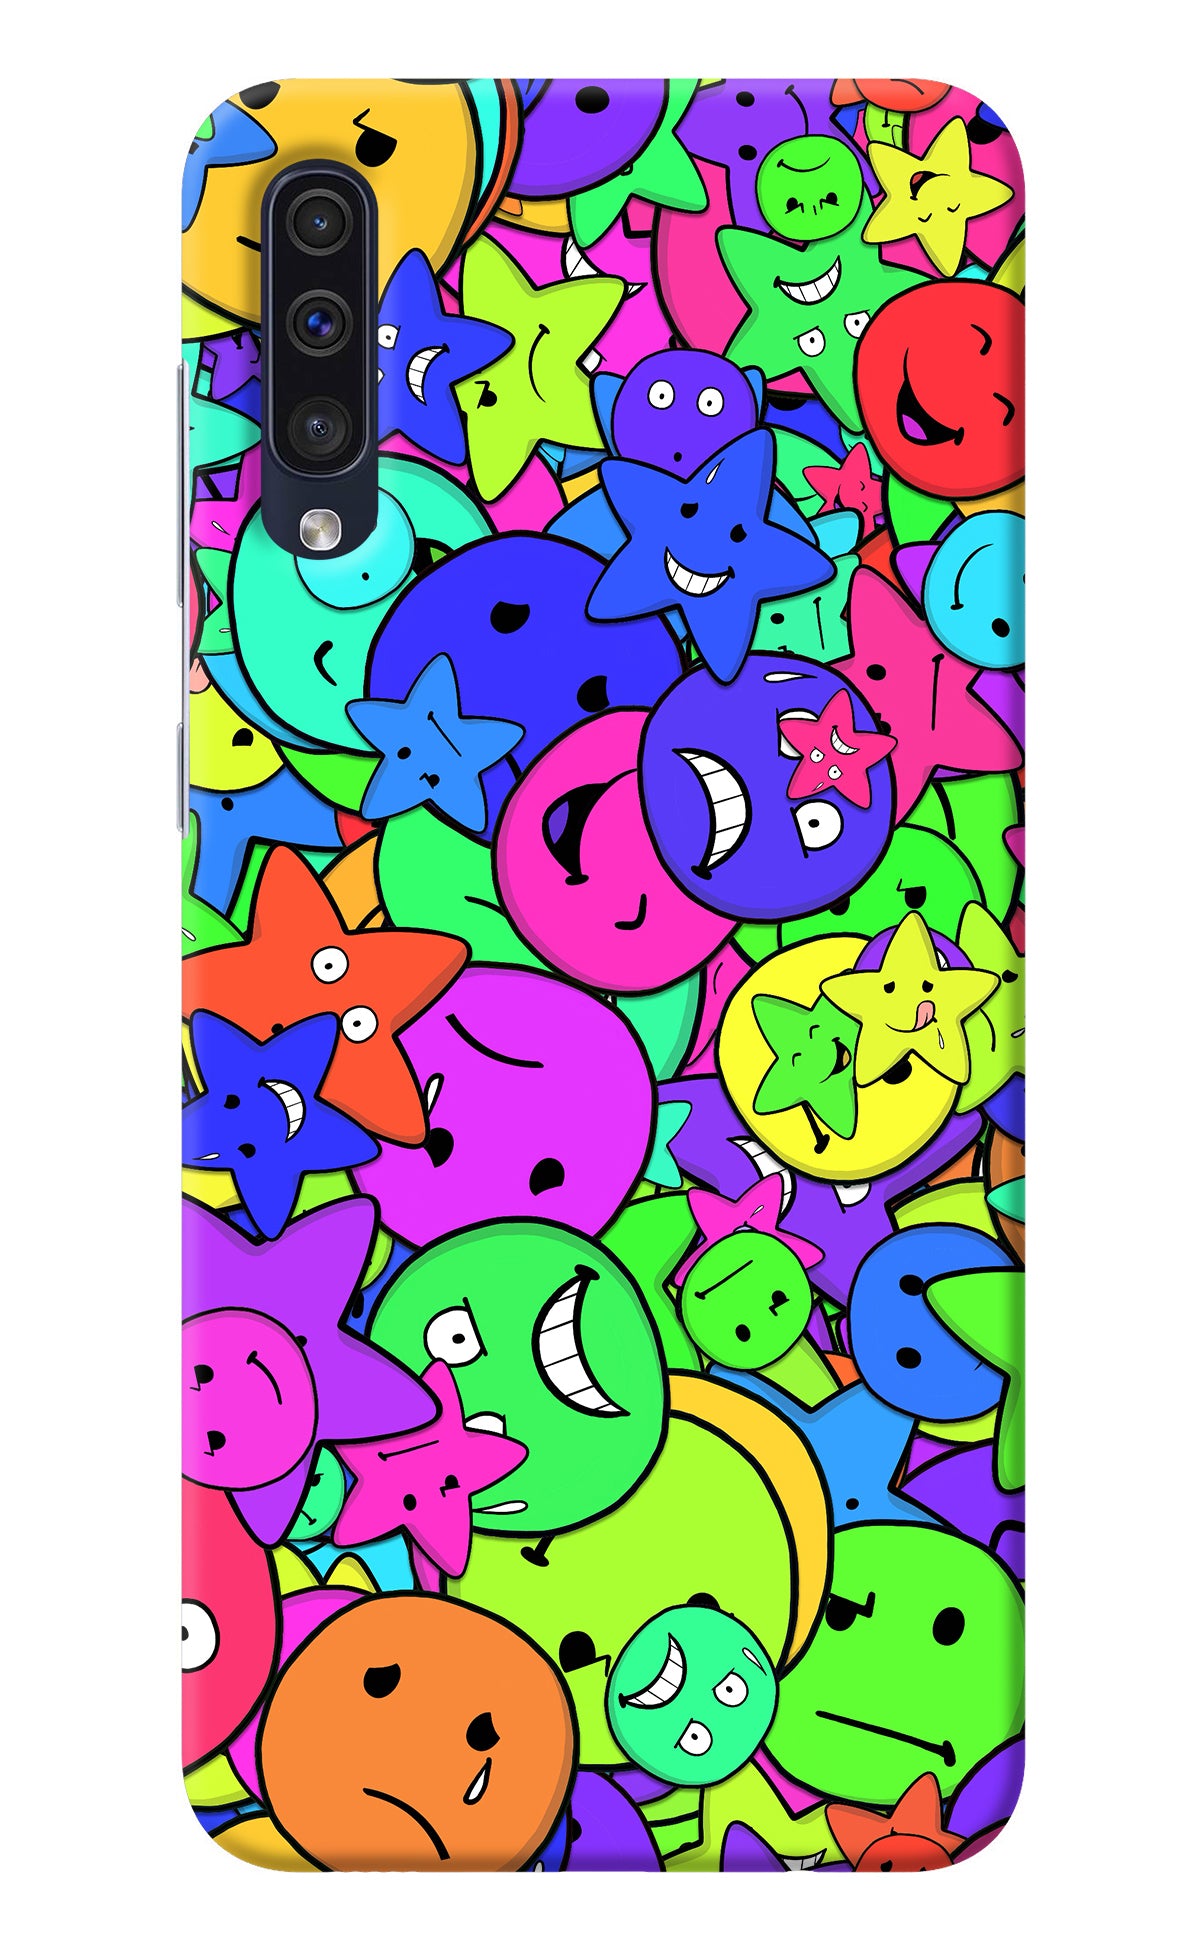 Fun Doodle Samsung A50/A50s/A30s Back Cover